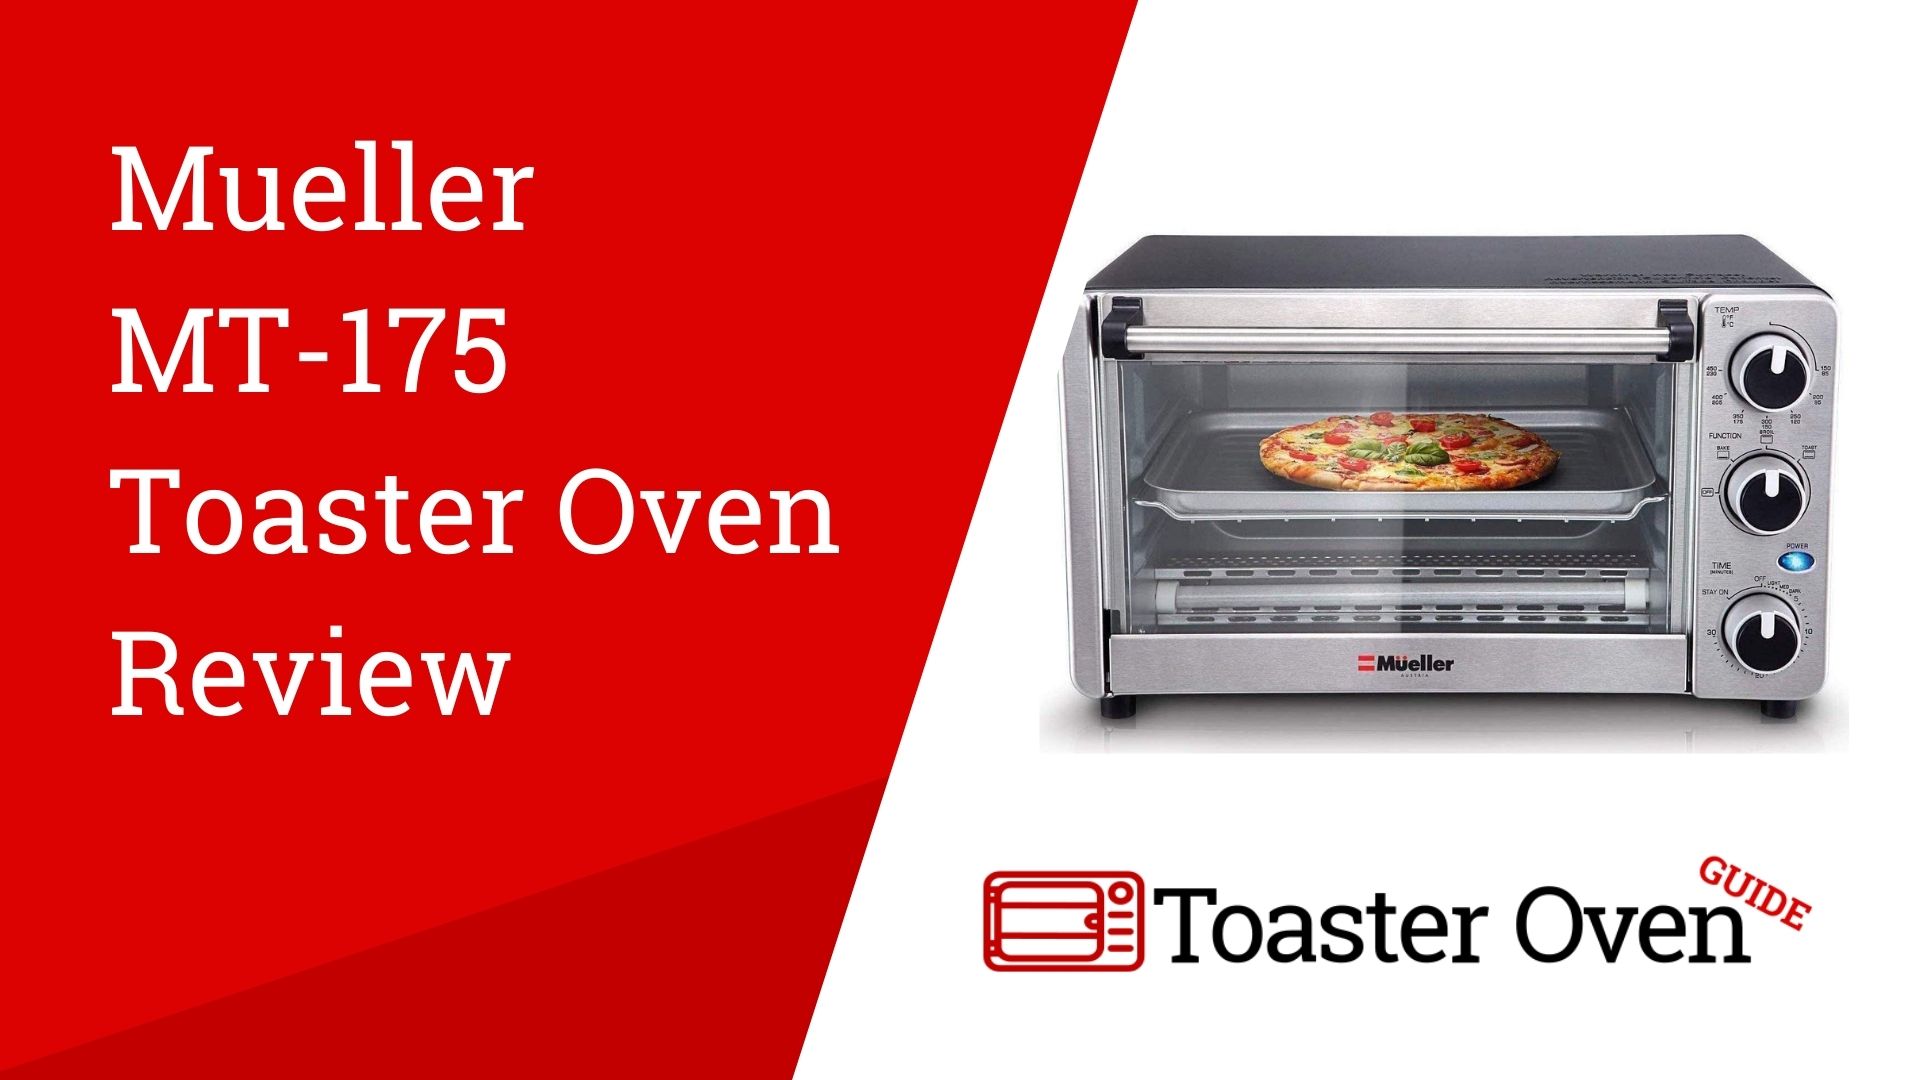 https://www.toasterovenguide.com/wp-content/uploads/2020/09/Mueller-MT-175-Toaster-Oven-Review.jpg